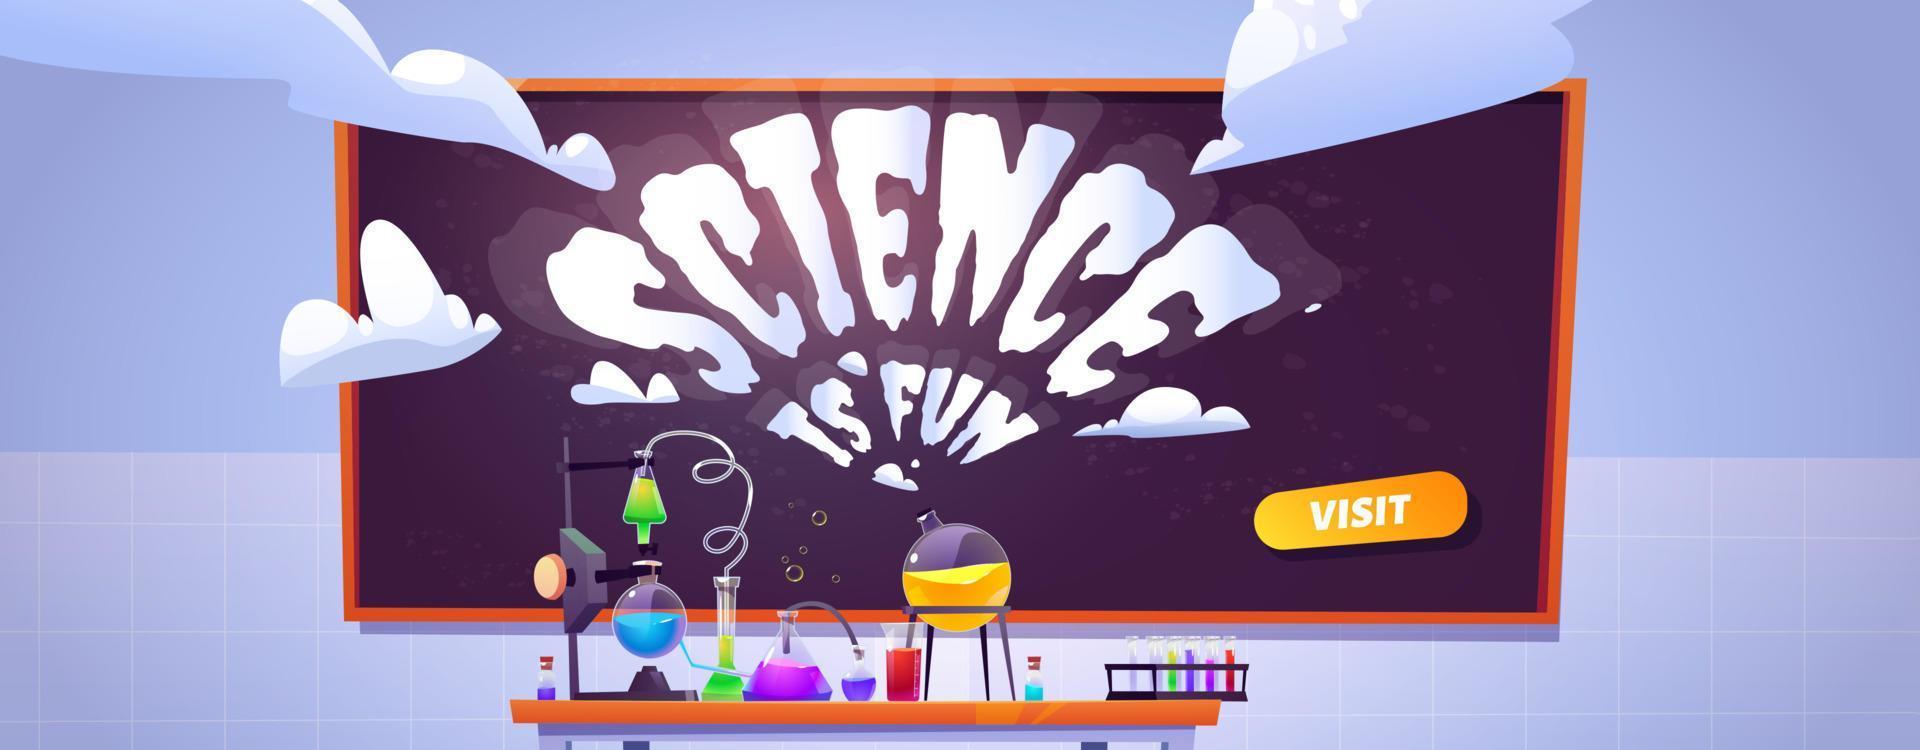 Science lab banner for study and experiments vector